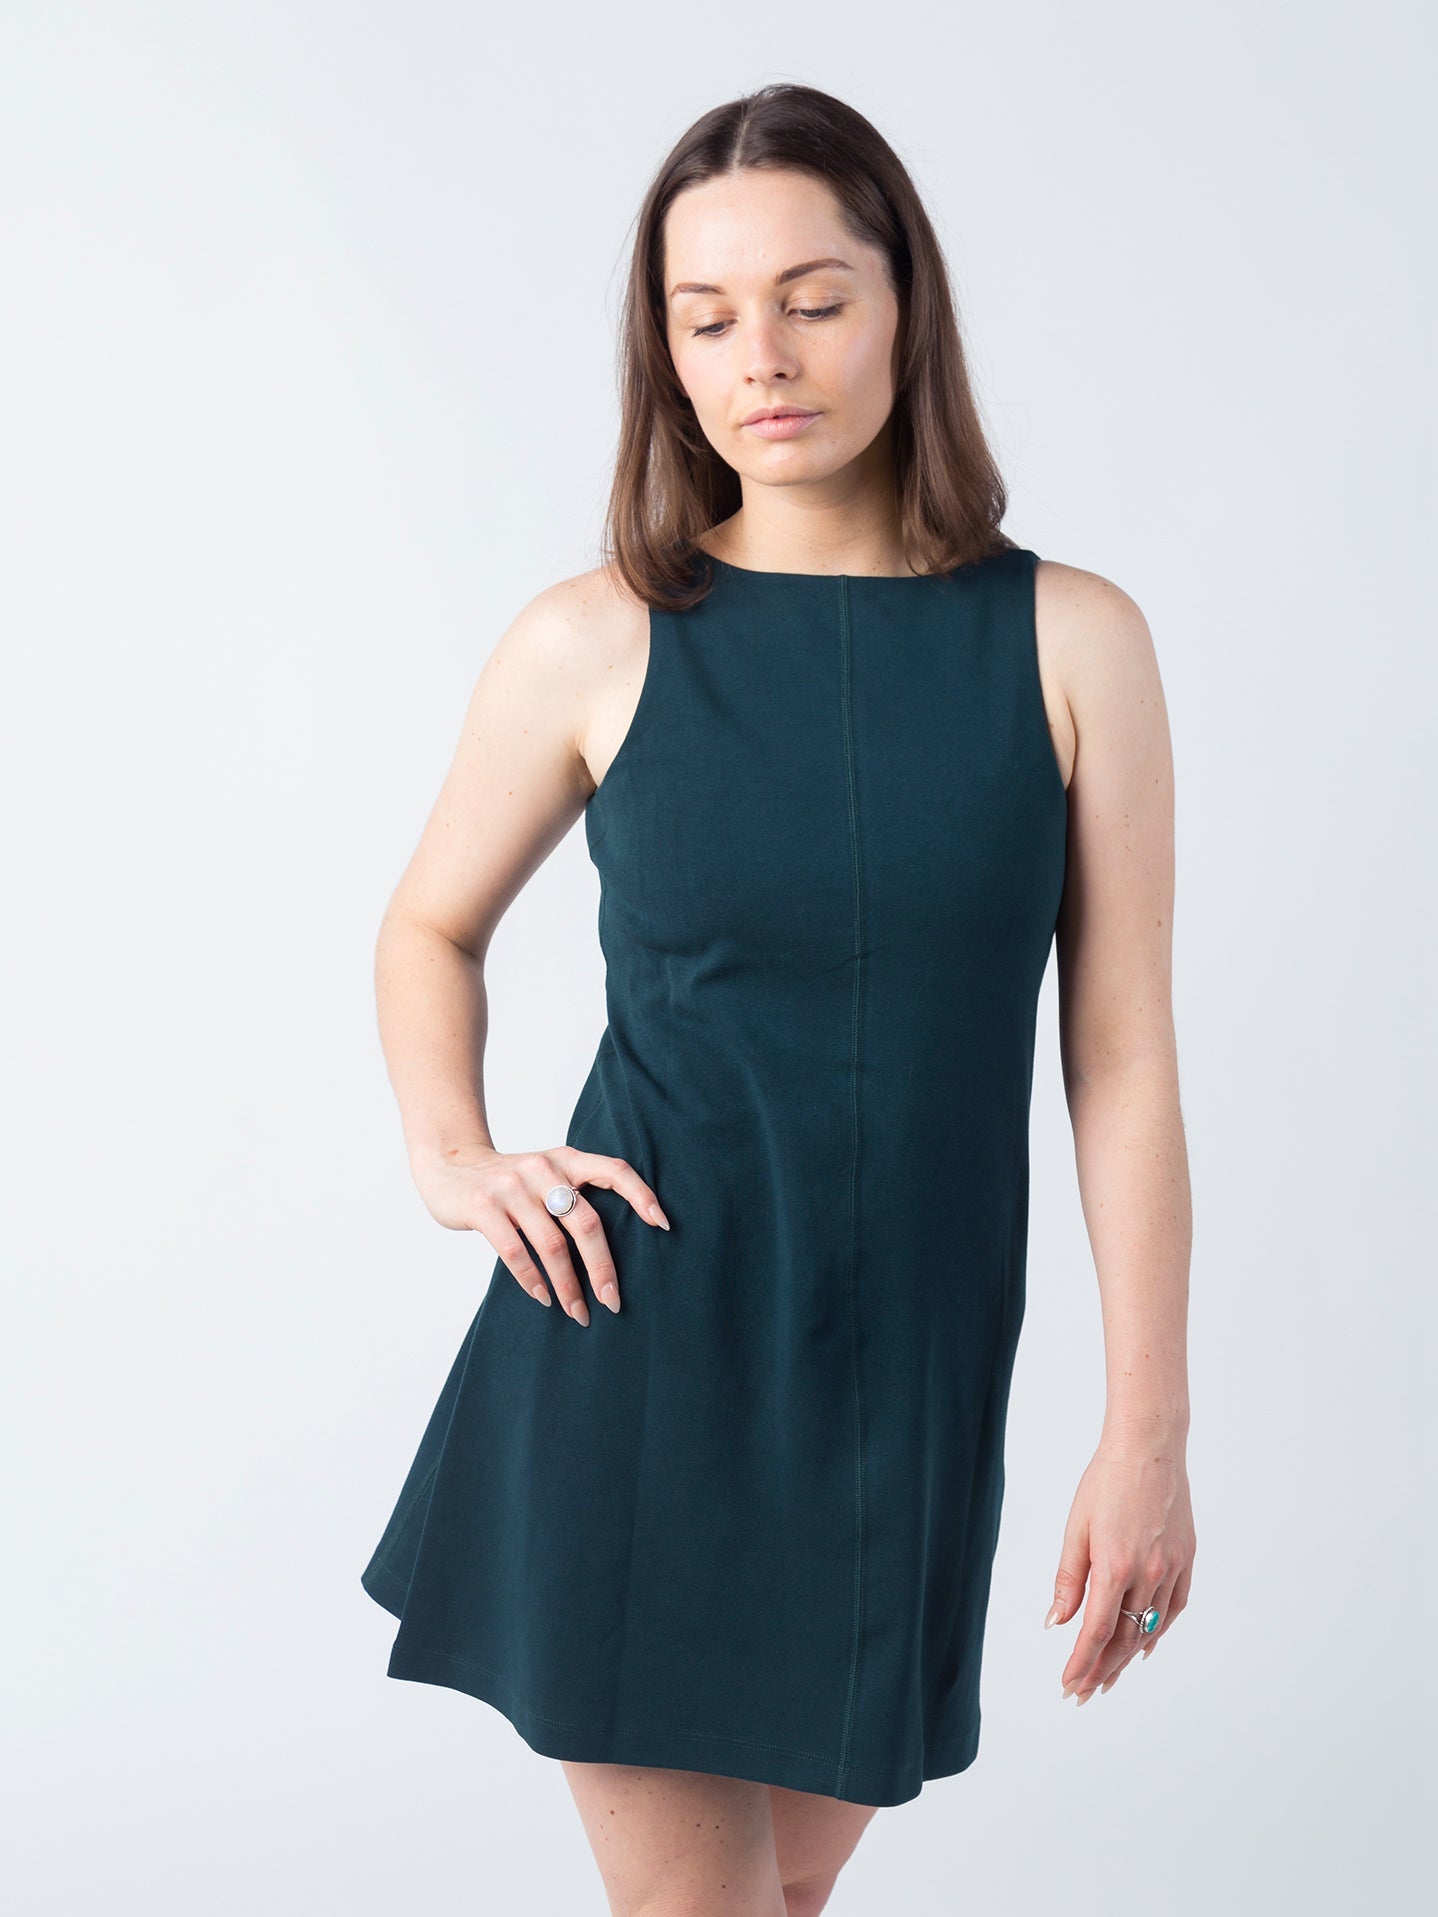 PlantTec™ Reversible Dress | Monstera by Happy Earth